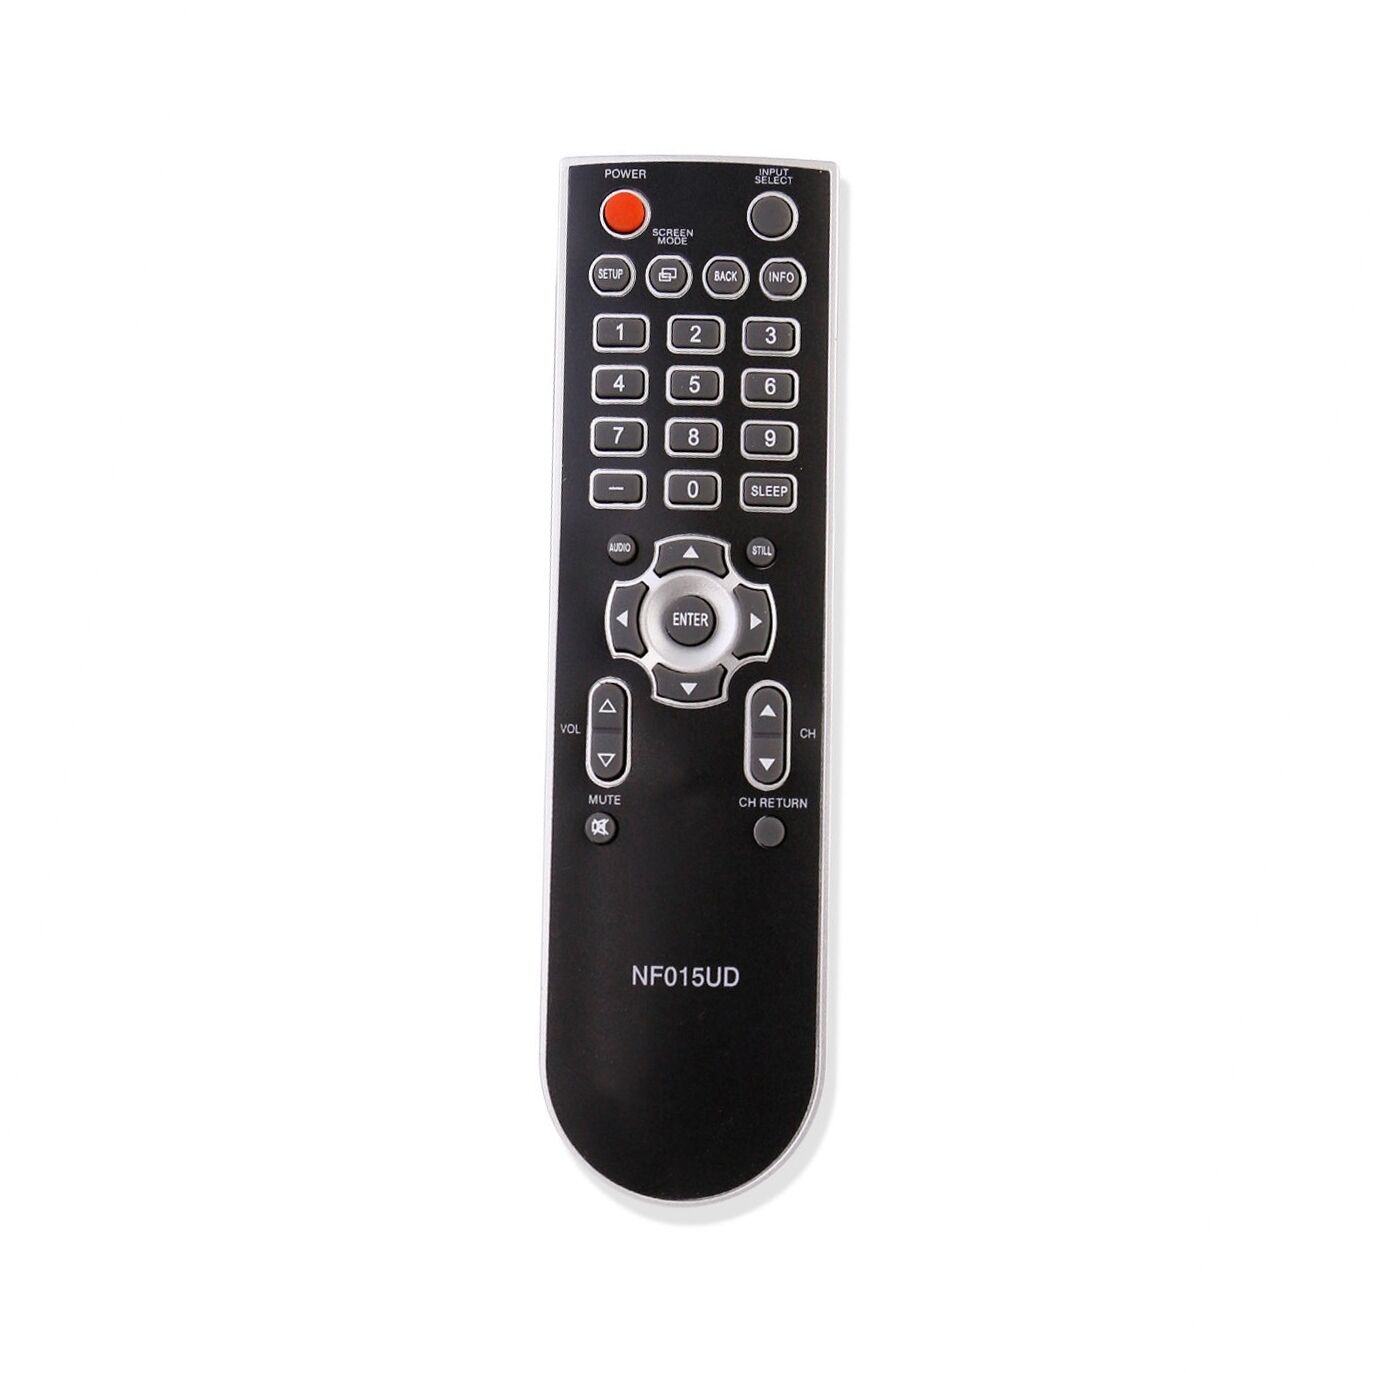 New Remote Control NF015UD NF020UD for Emerson Sylvania TV LC320EM8 LC420EM8